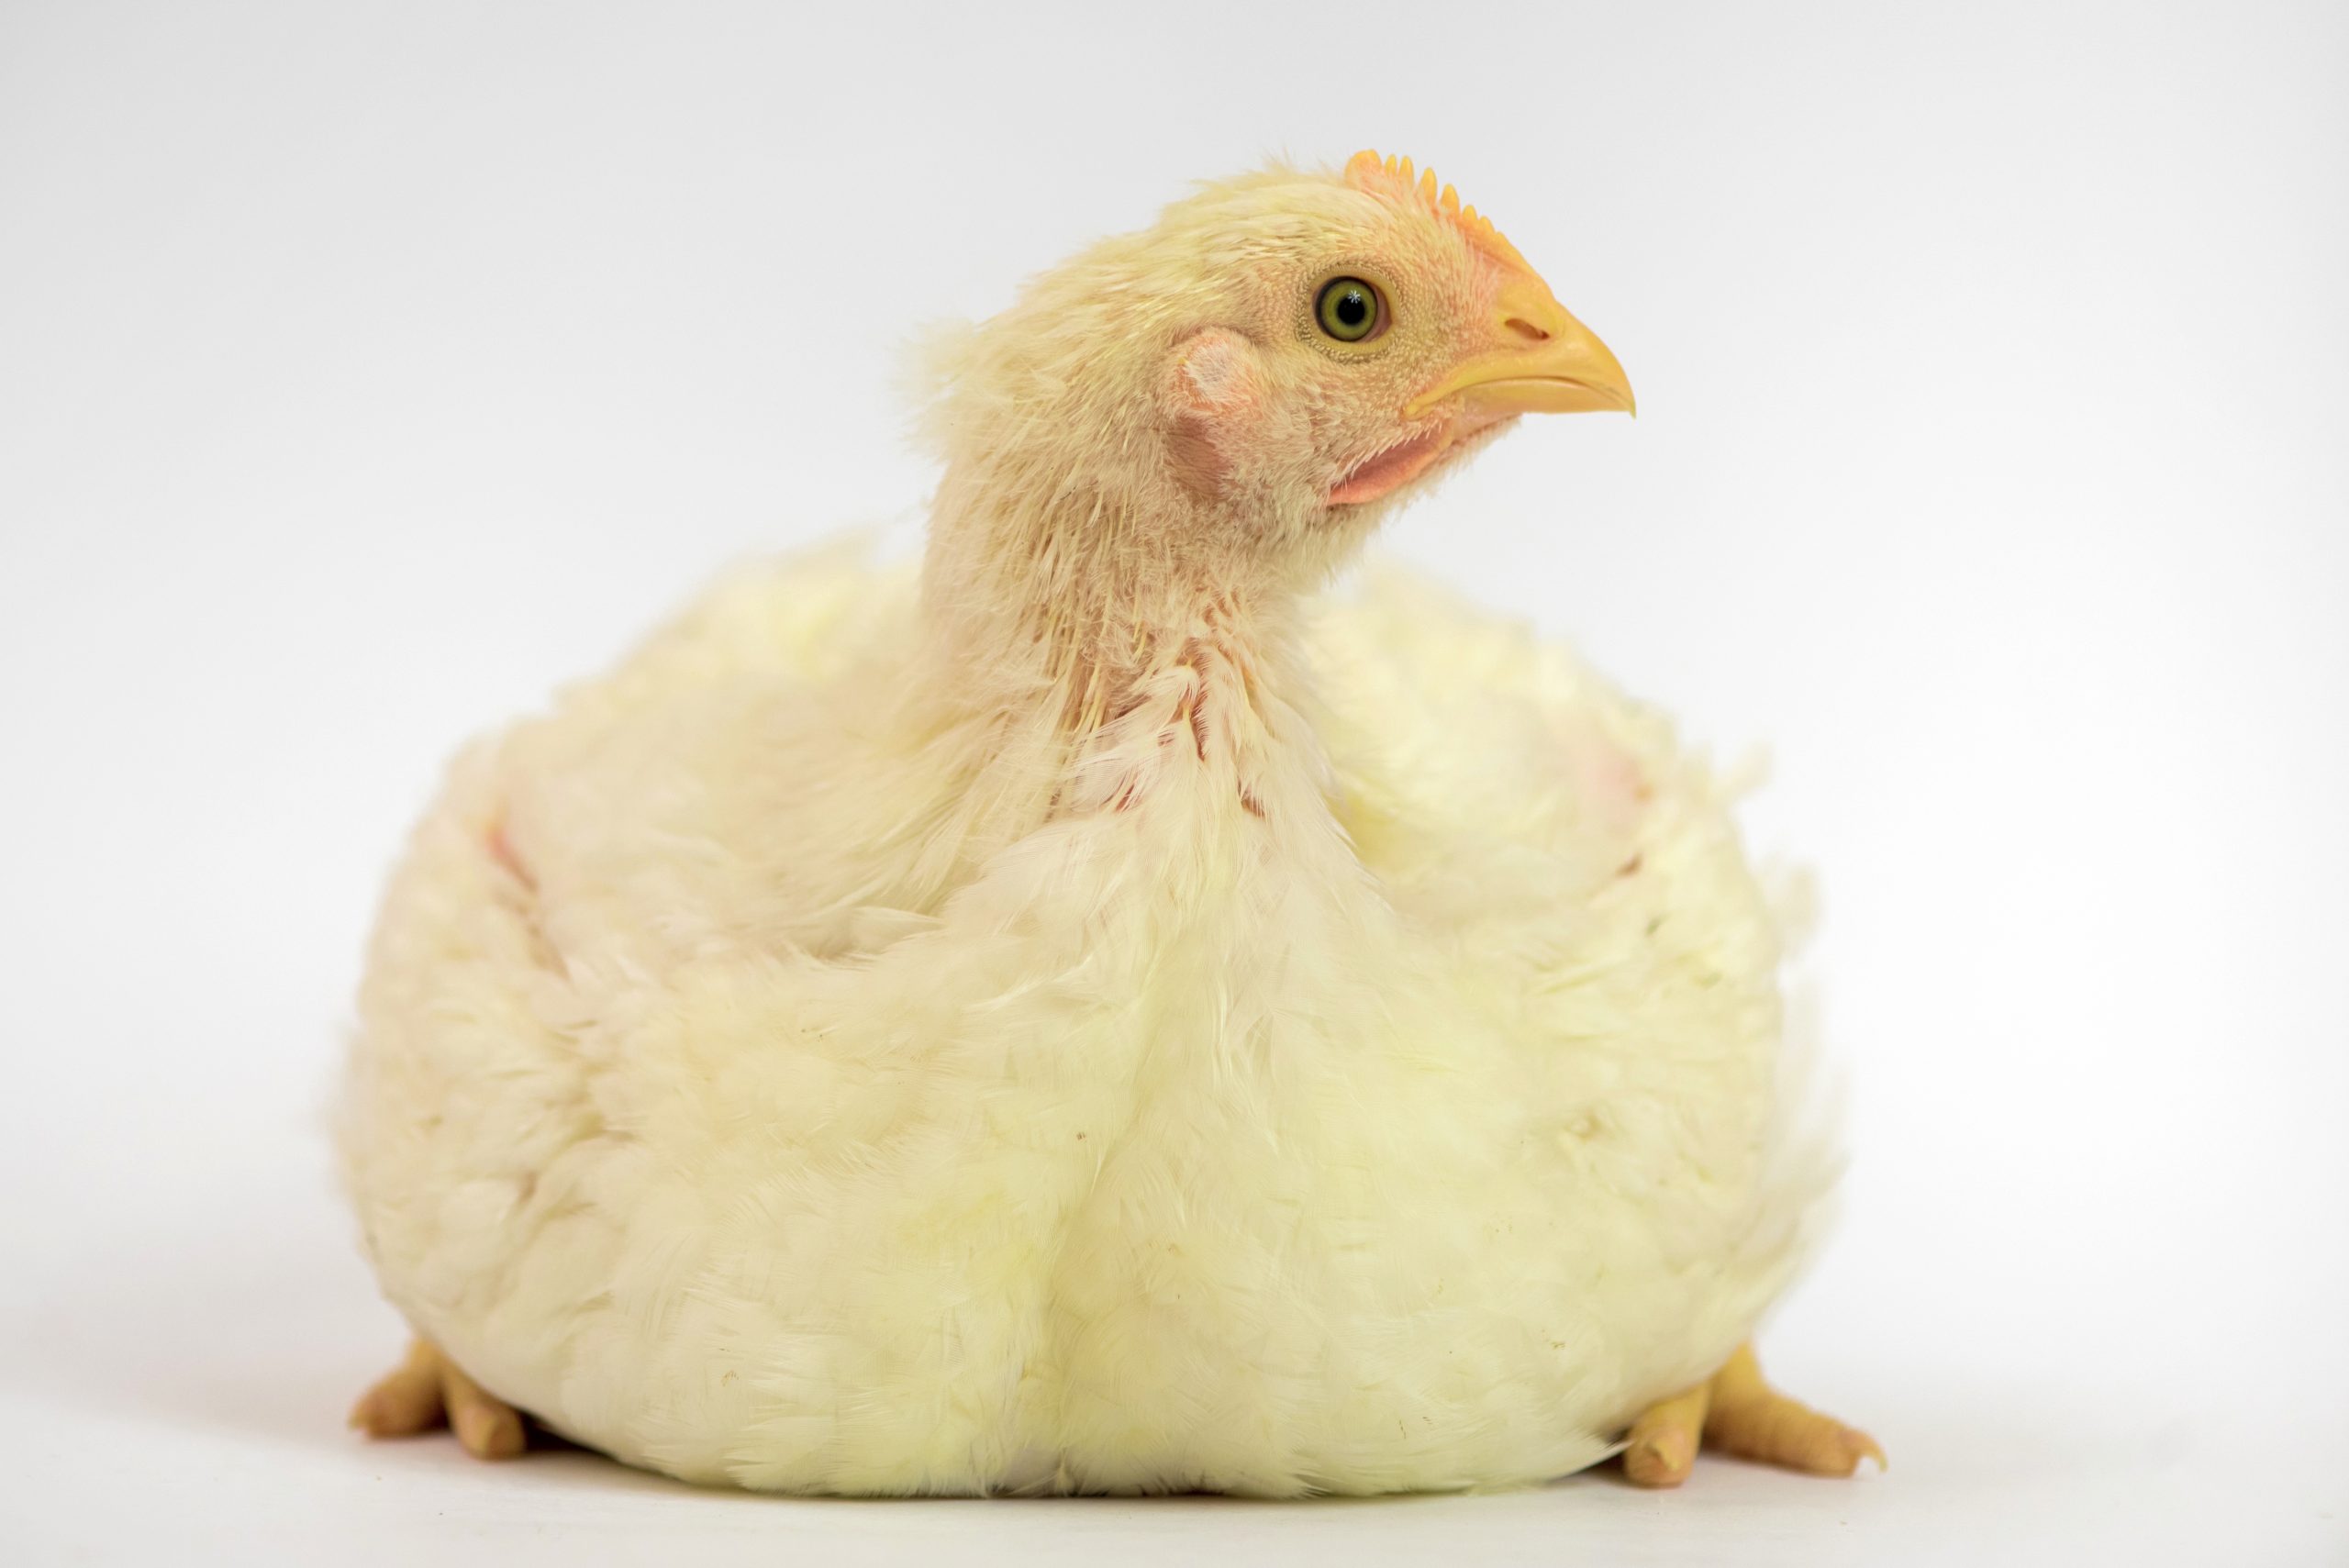 Moving the food industry towards better chicken welfare in 2021